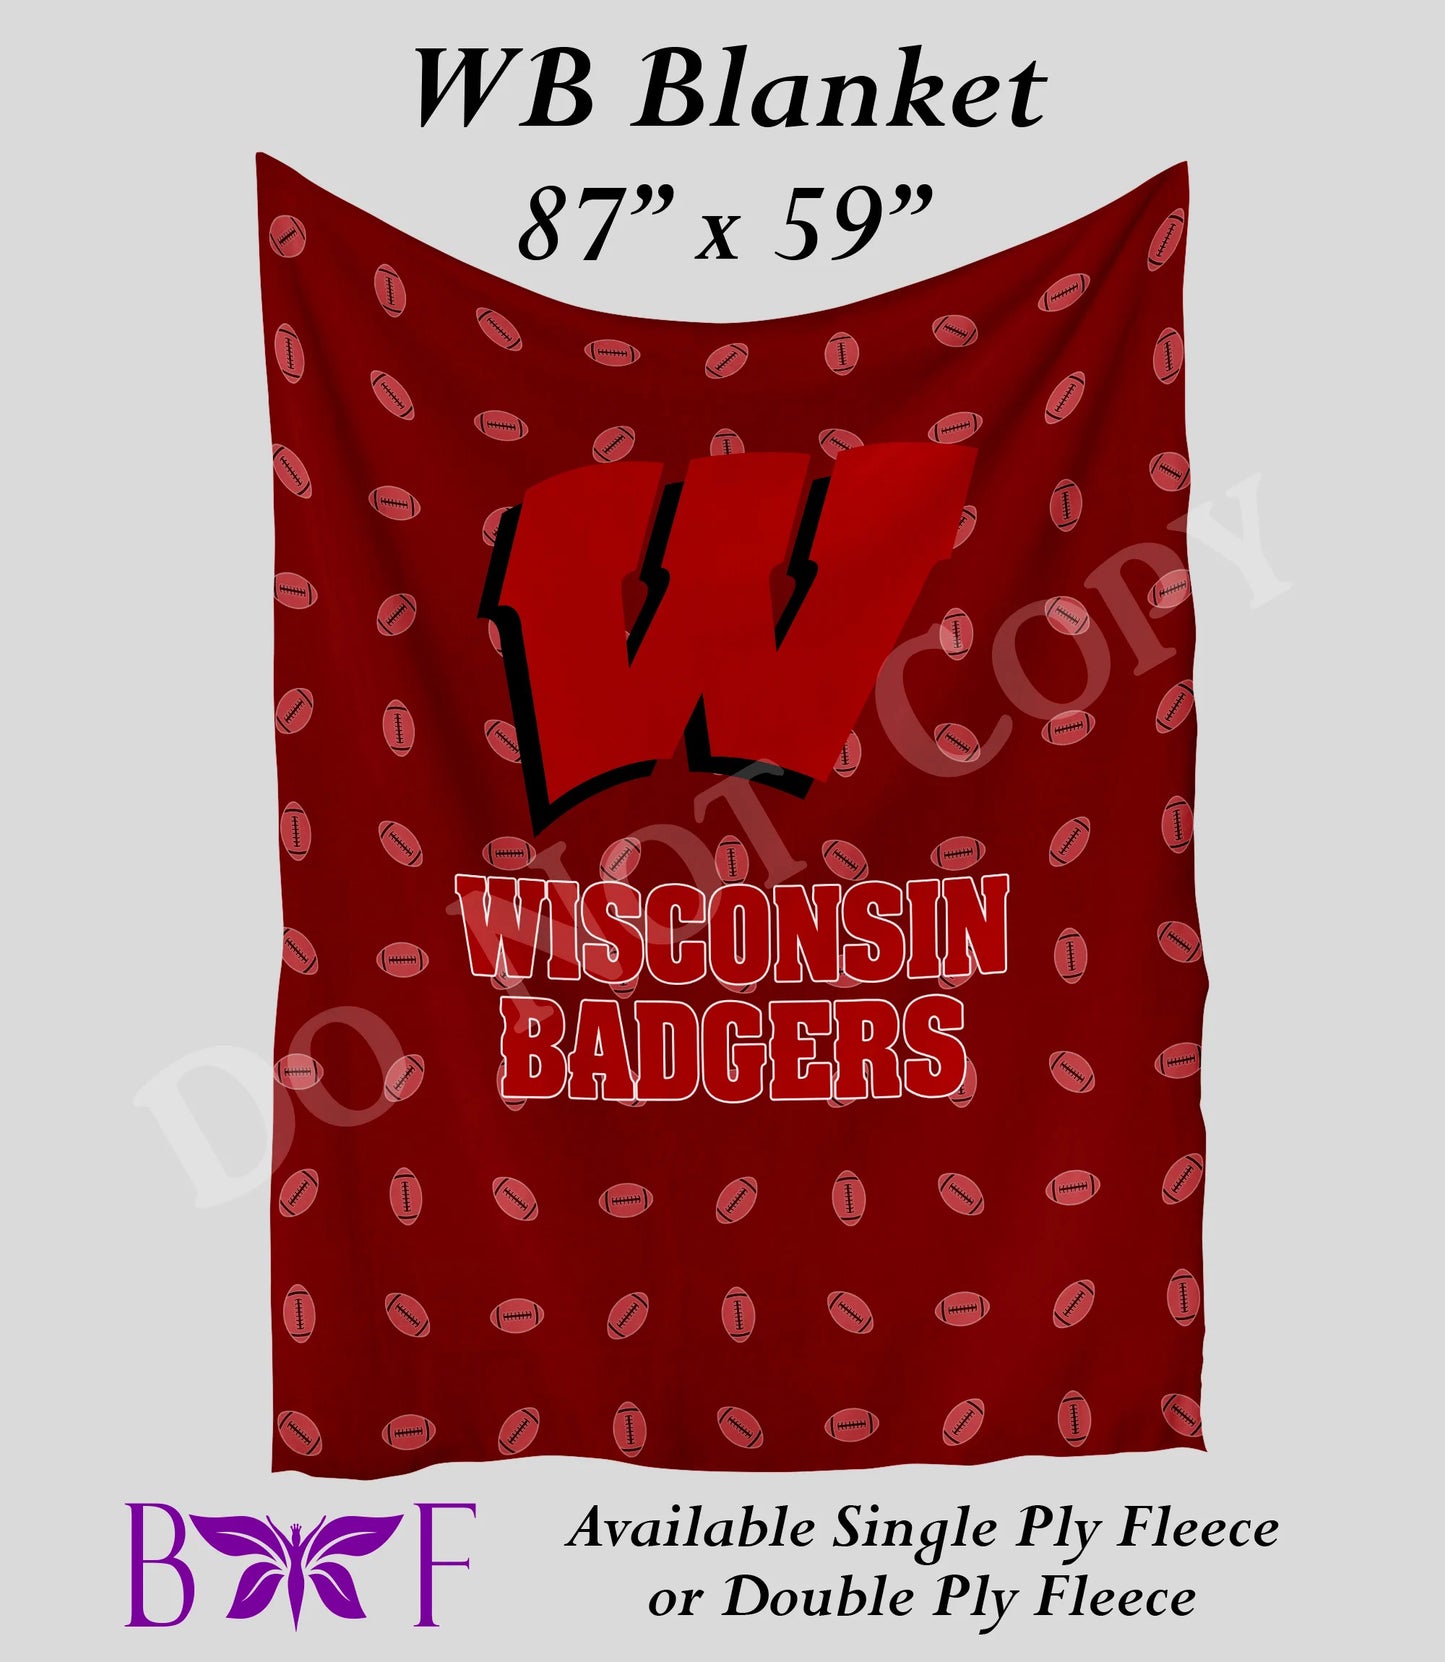 WB 59"x87" soft blanket also available with sherpa fleece